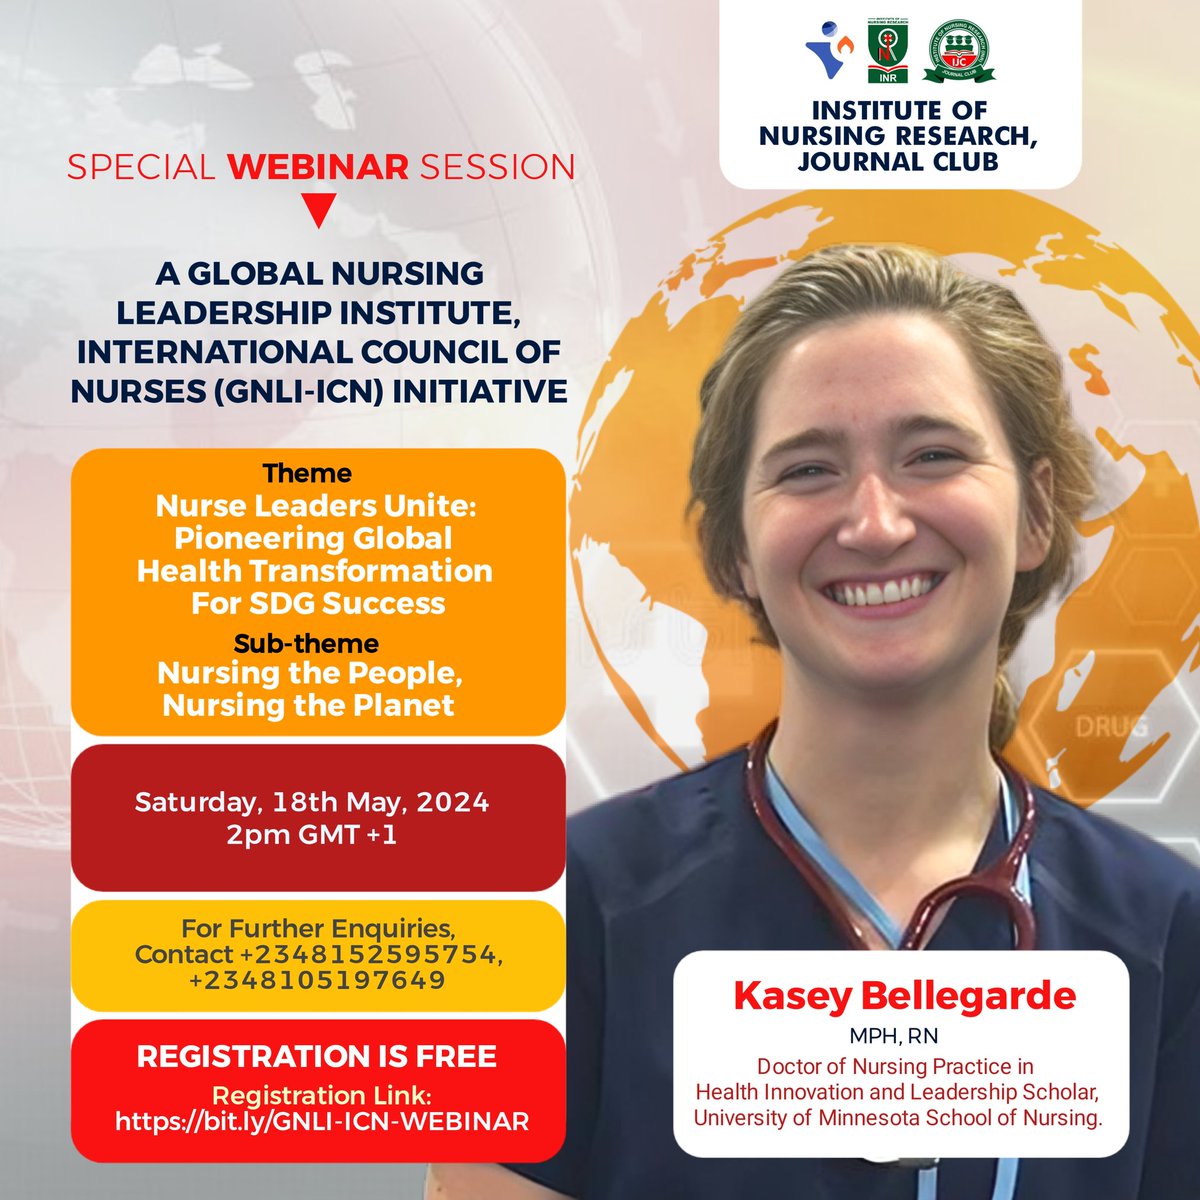 The Global Nursing Leadership Institute, International Council of Nurses (GNLI-ICN) in conjunction with INR Nigeria Journal Club presents a special webinar session Theme - Nurse Leaders Unite: Pioneering Global Health Transformation For SDG Success #½